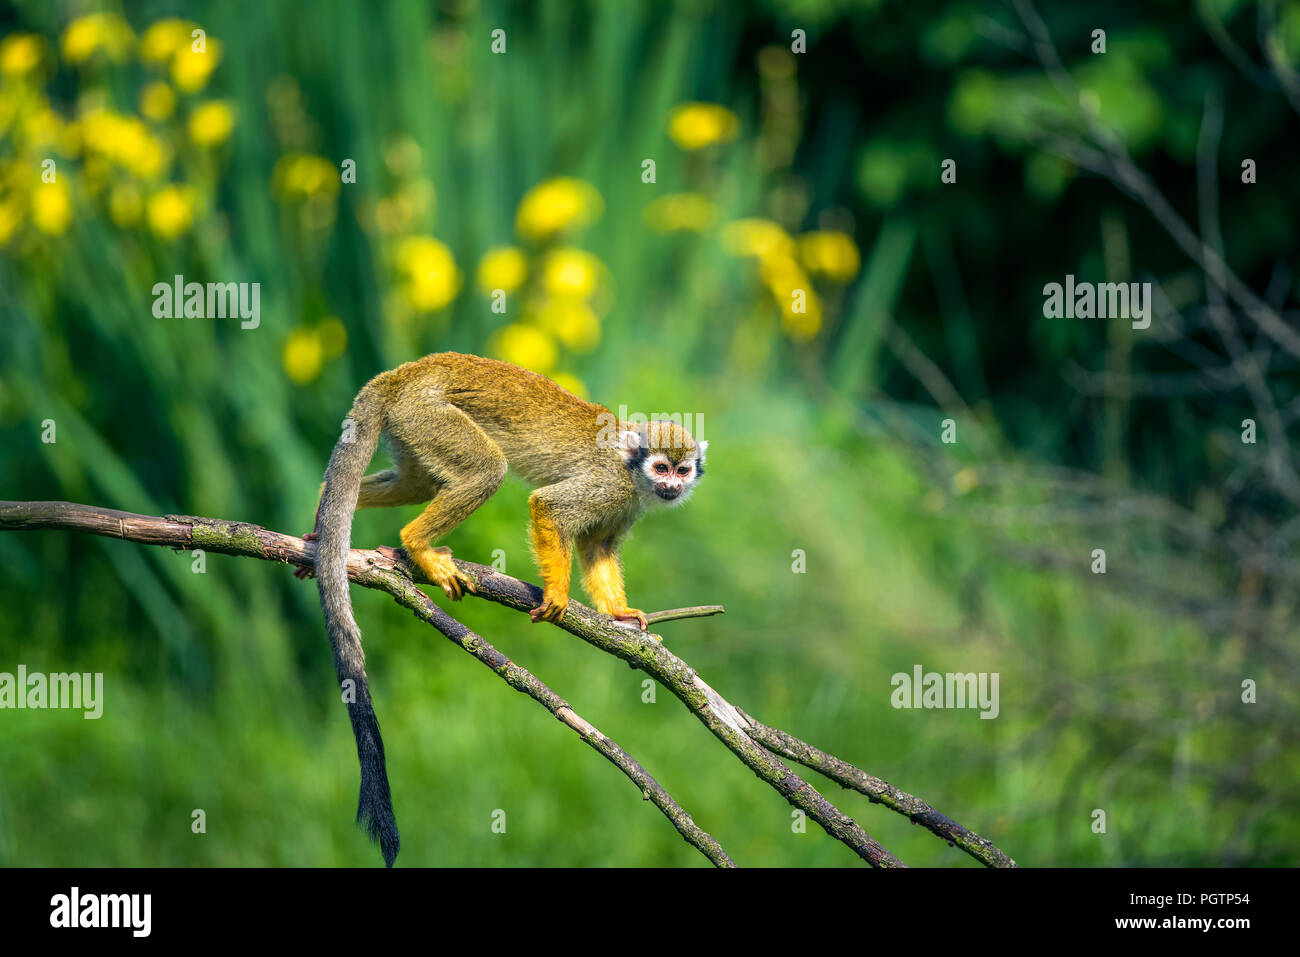 Common squirrel monkey walking on a tree branch Stock Photo